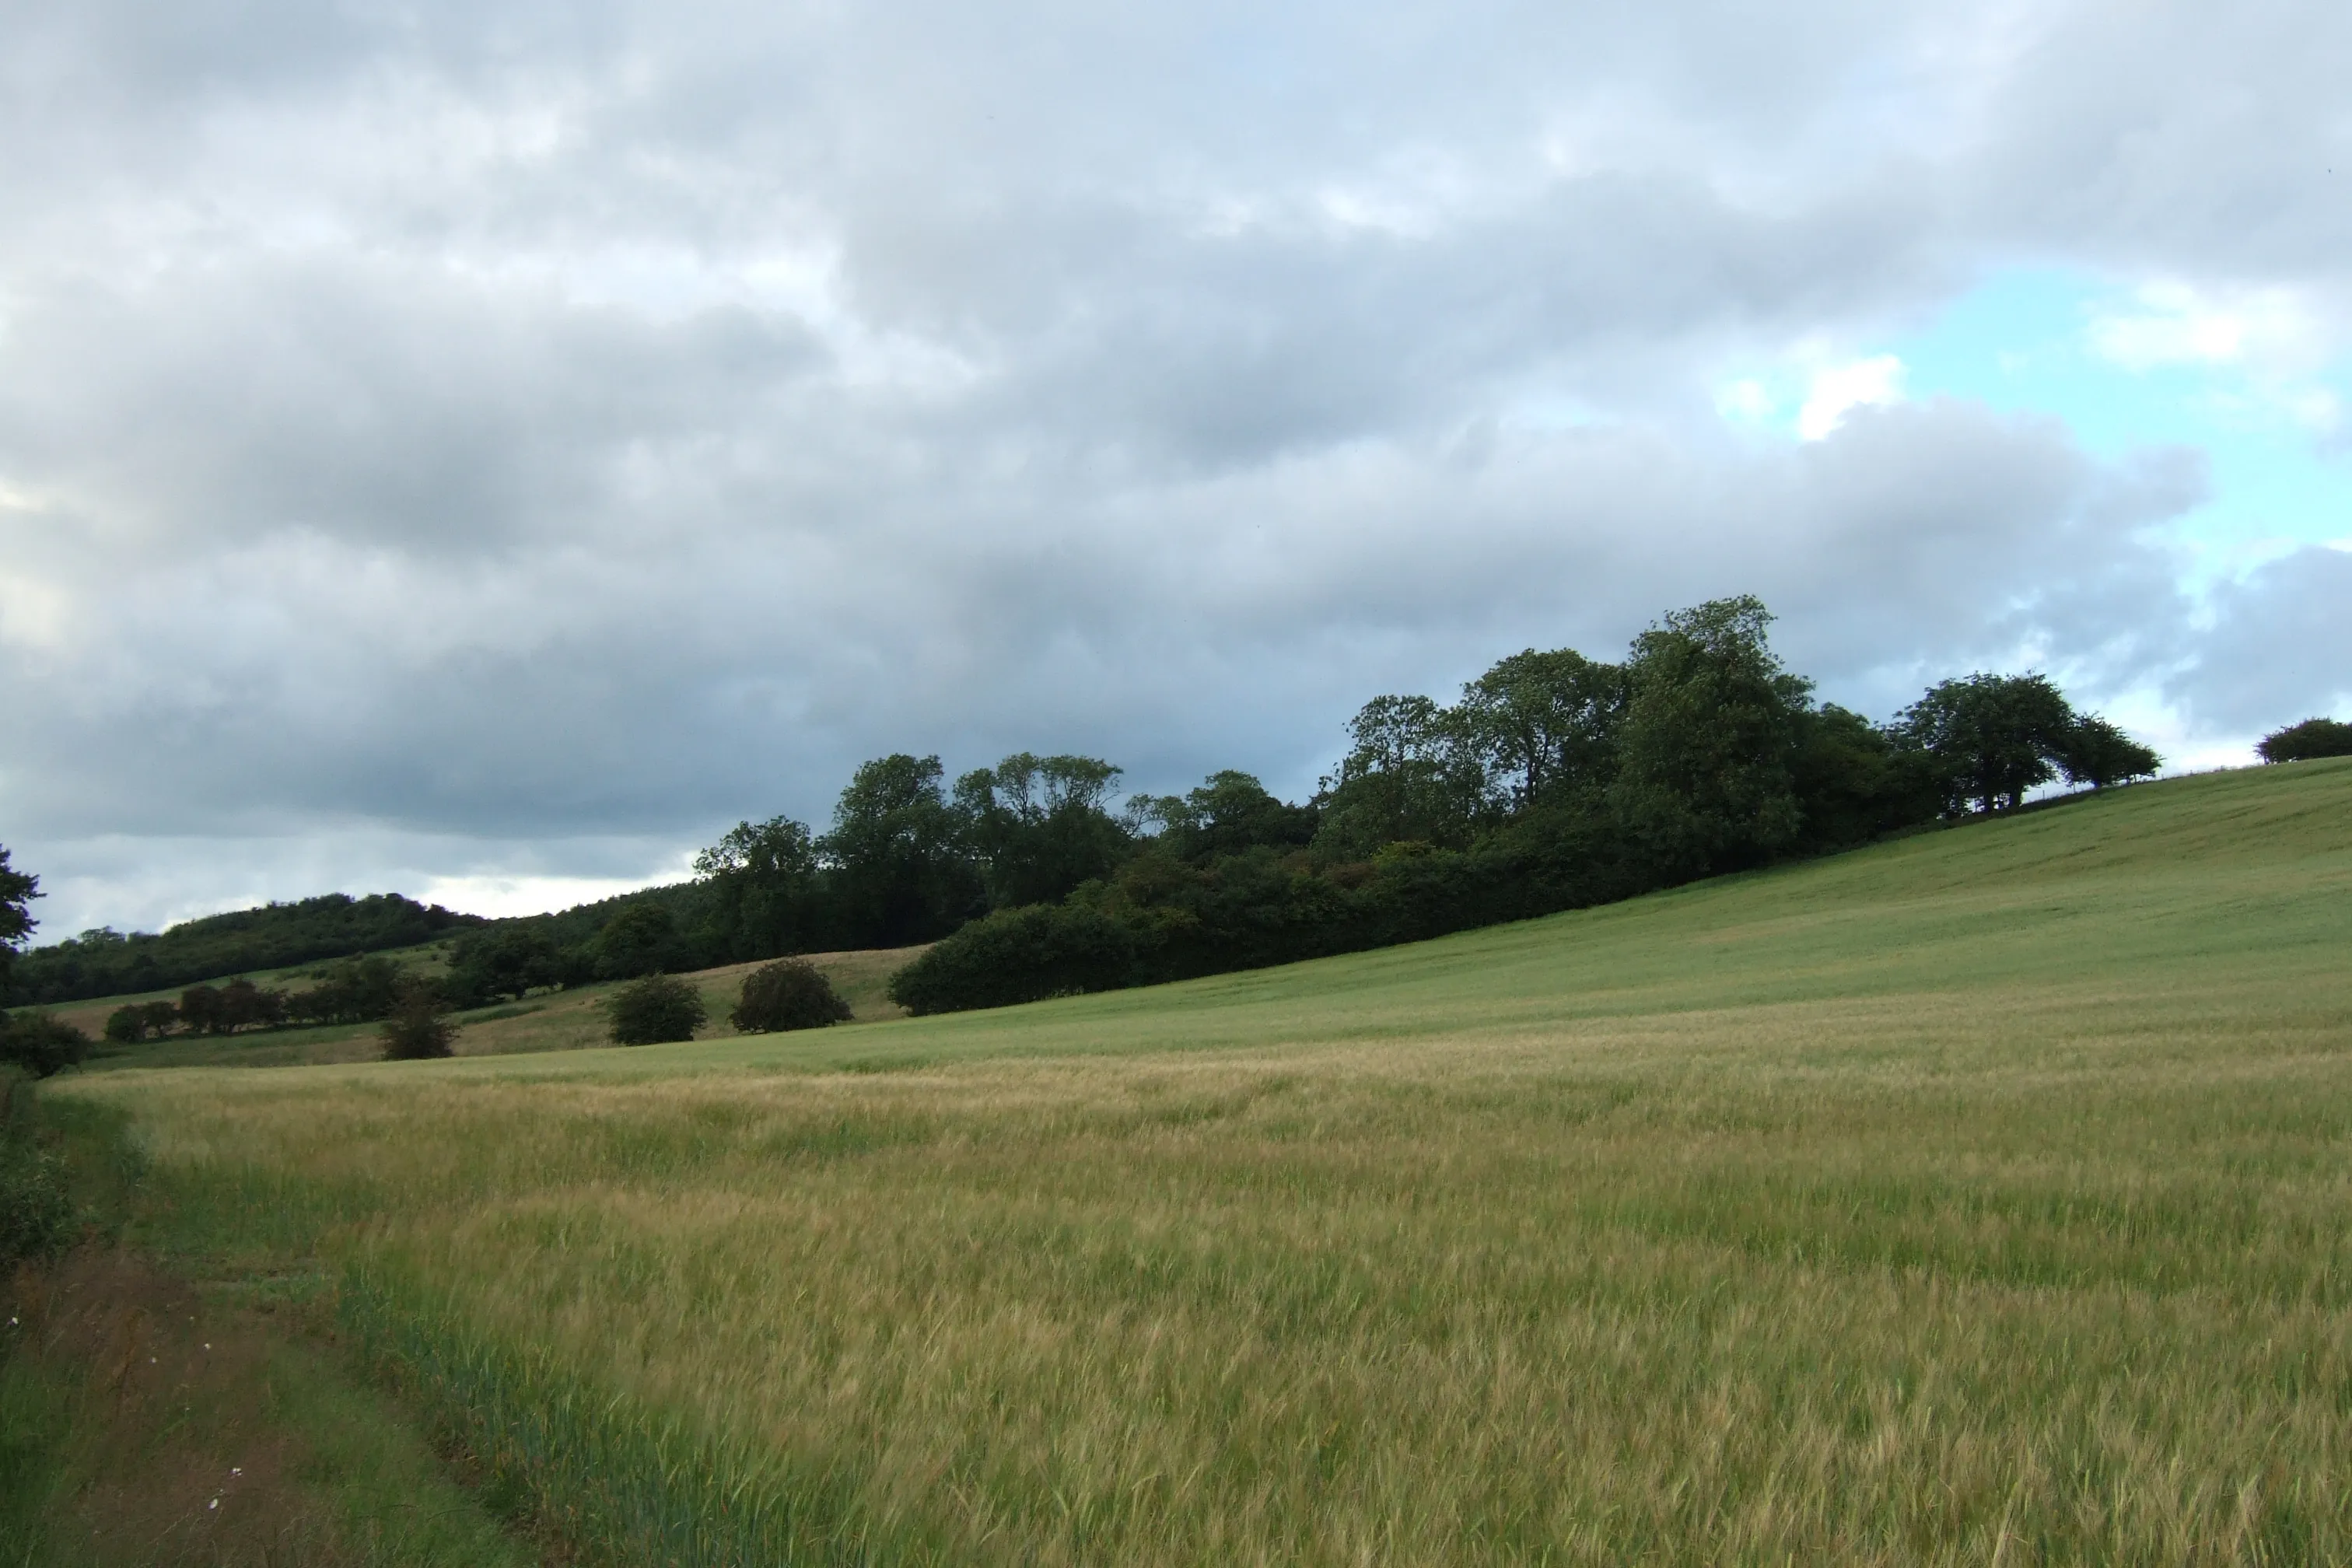 Photograph of South Cliffe, Yorkshire Wolds